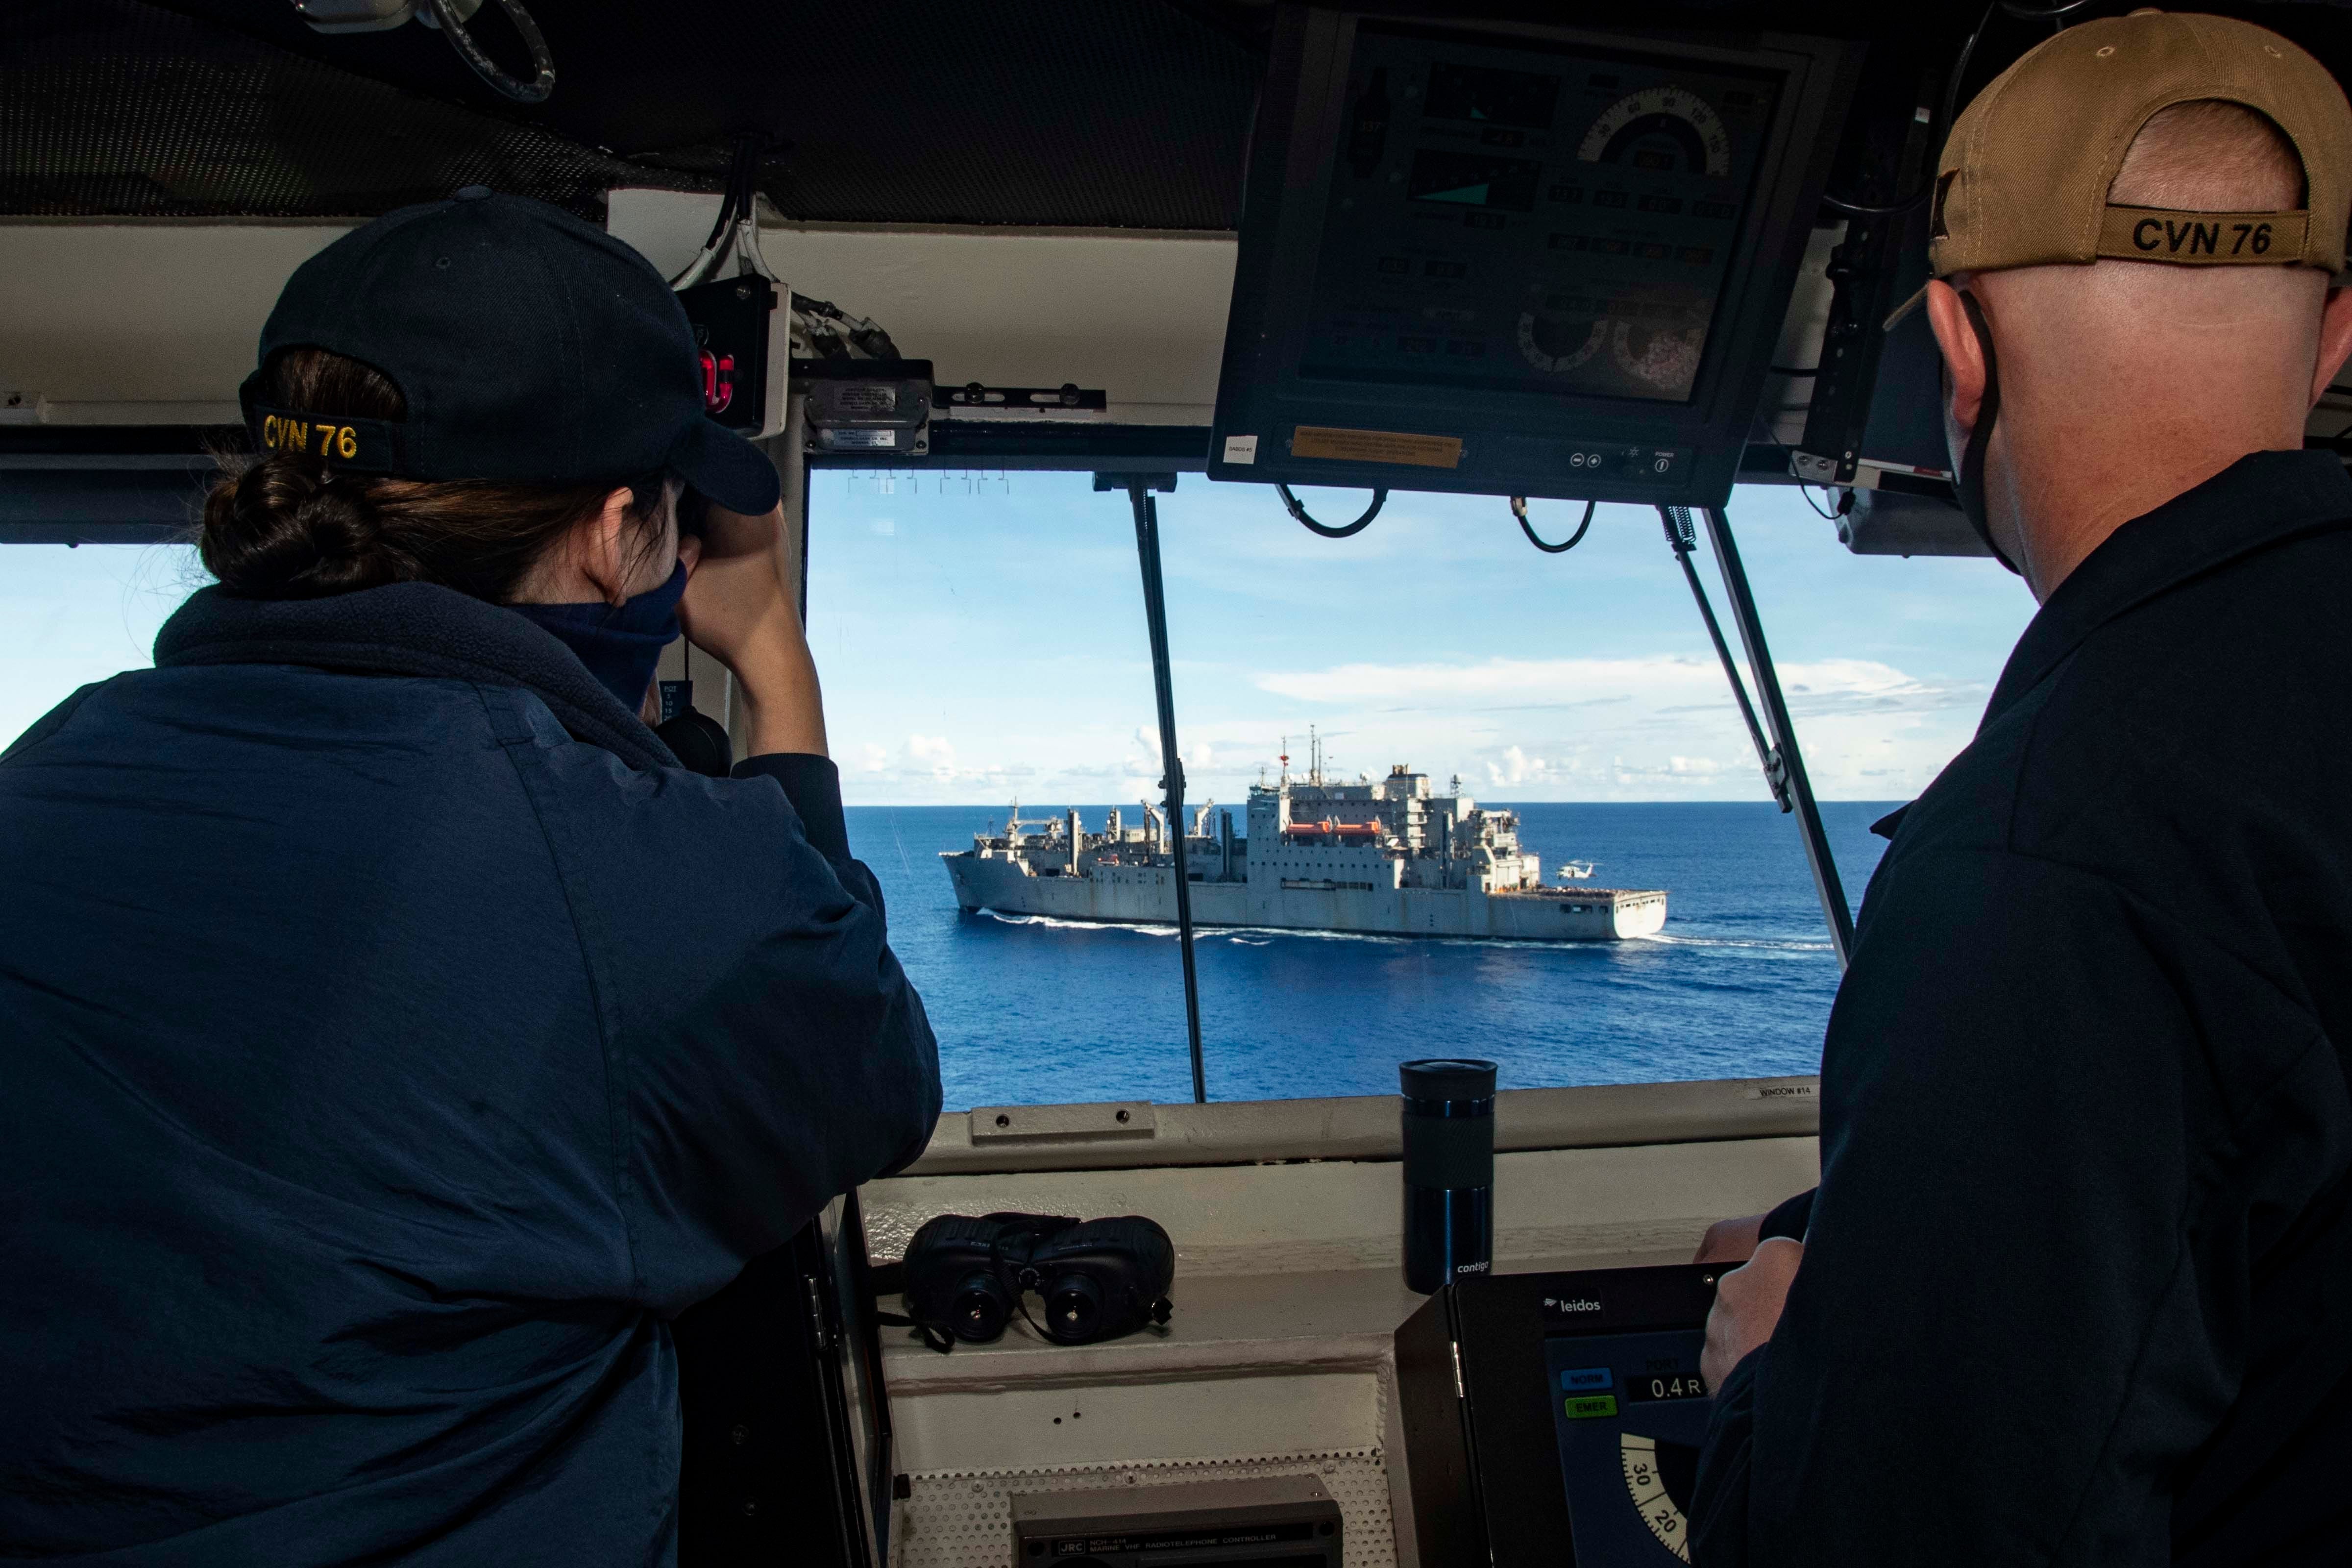 Lt. j.g. Mary Kate Corcoran, left, from Mercersburg, Pennsylvania, and Lt. j.g. Samuel Mobley, from Bloomington, Indiana, observe a replenishment-at-sea with dry cargo and ammunition ship USNS Alan Shepard from the pilothouse of the USS Ronald Reagan in support of Valiant Shield 2020 on Sept. 22, 2020.